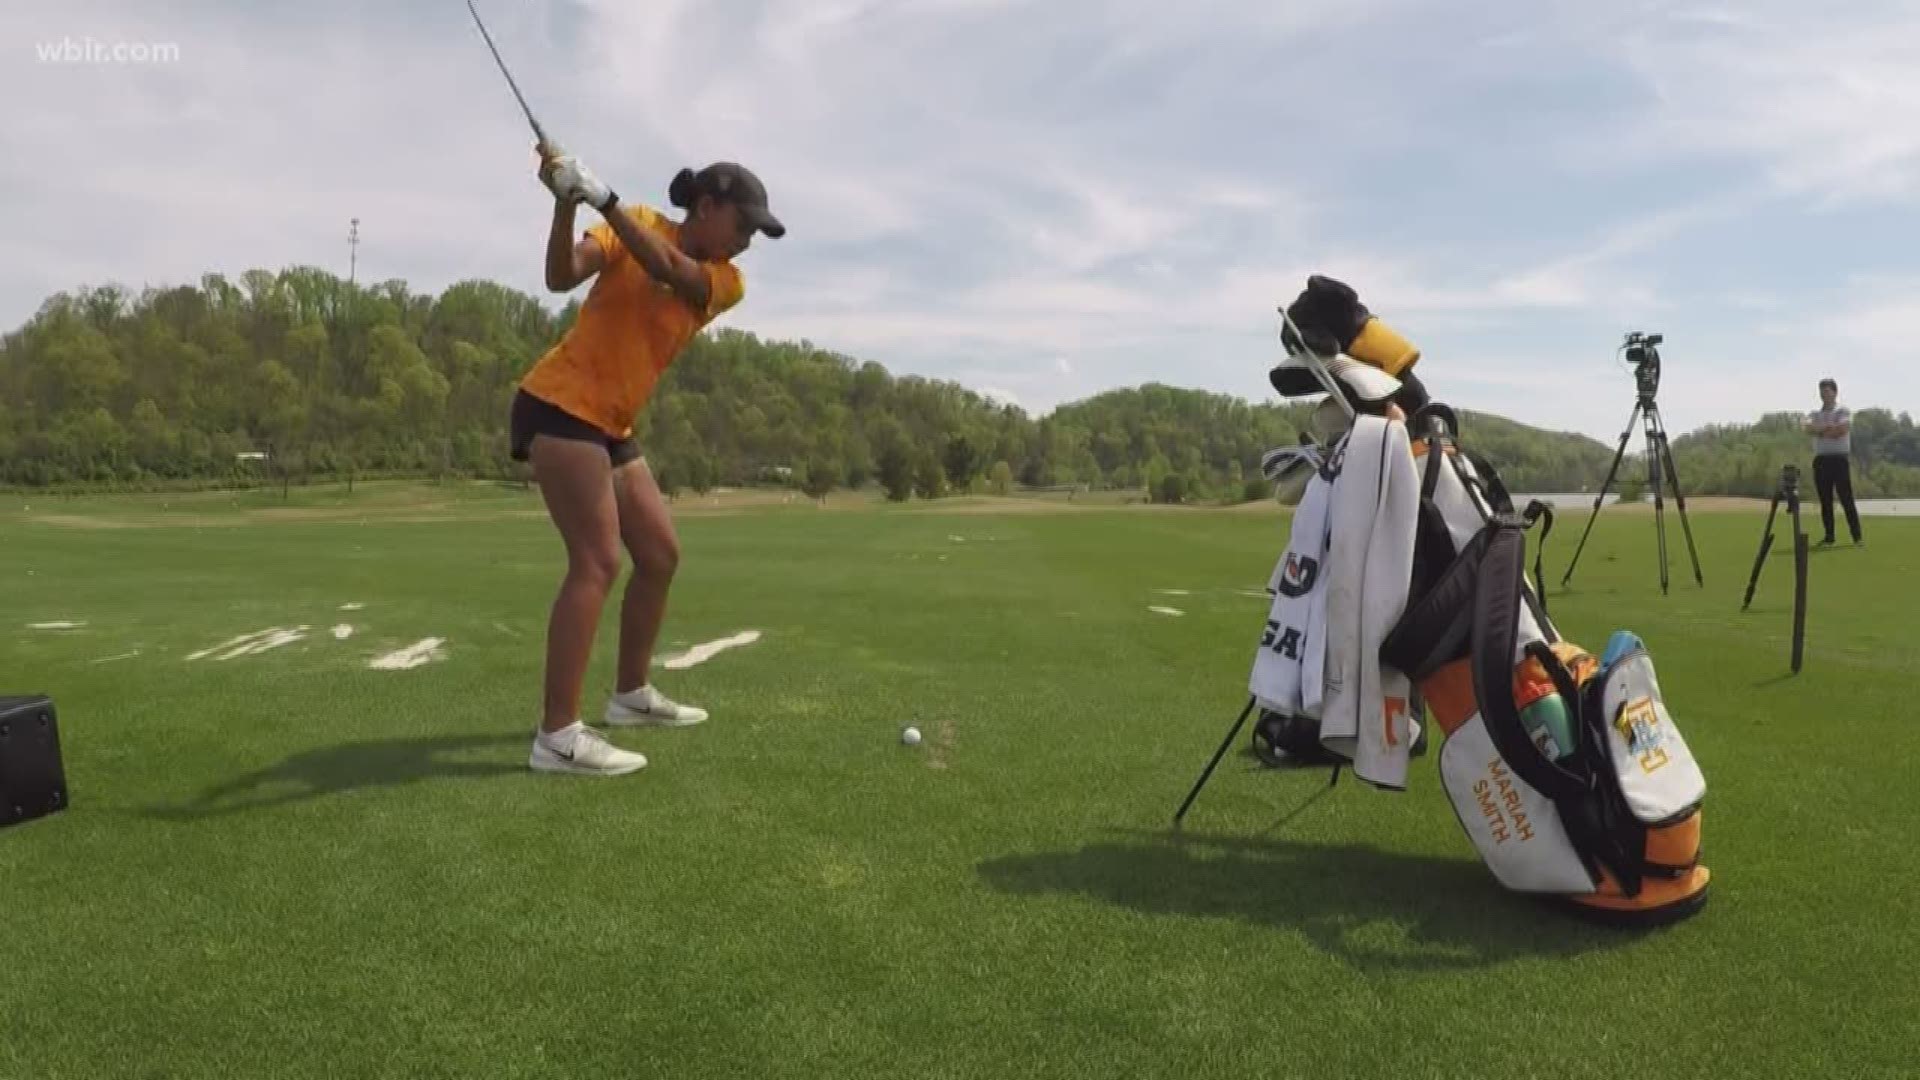 Before Tiger Woods won his fifth Masters this past weekend, the clubhouse hosted its first-ever women's tournament. A Lady Vol was there -- taking part in history.